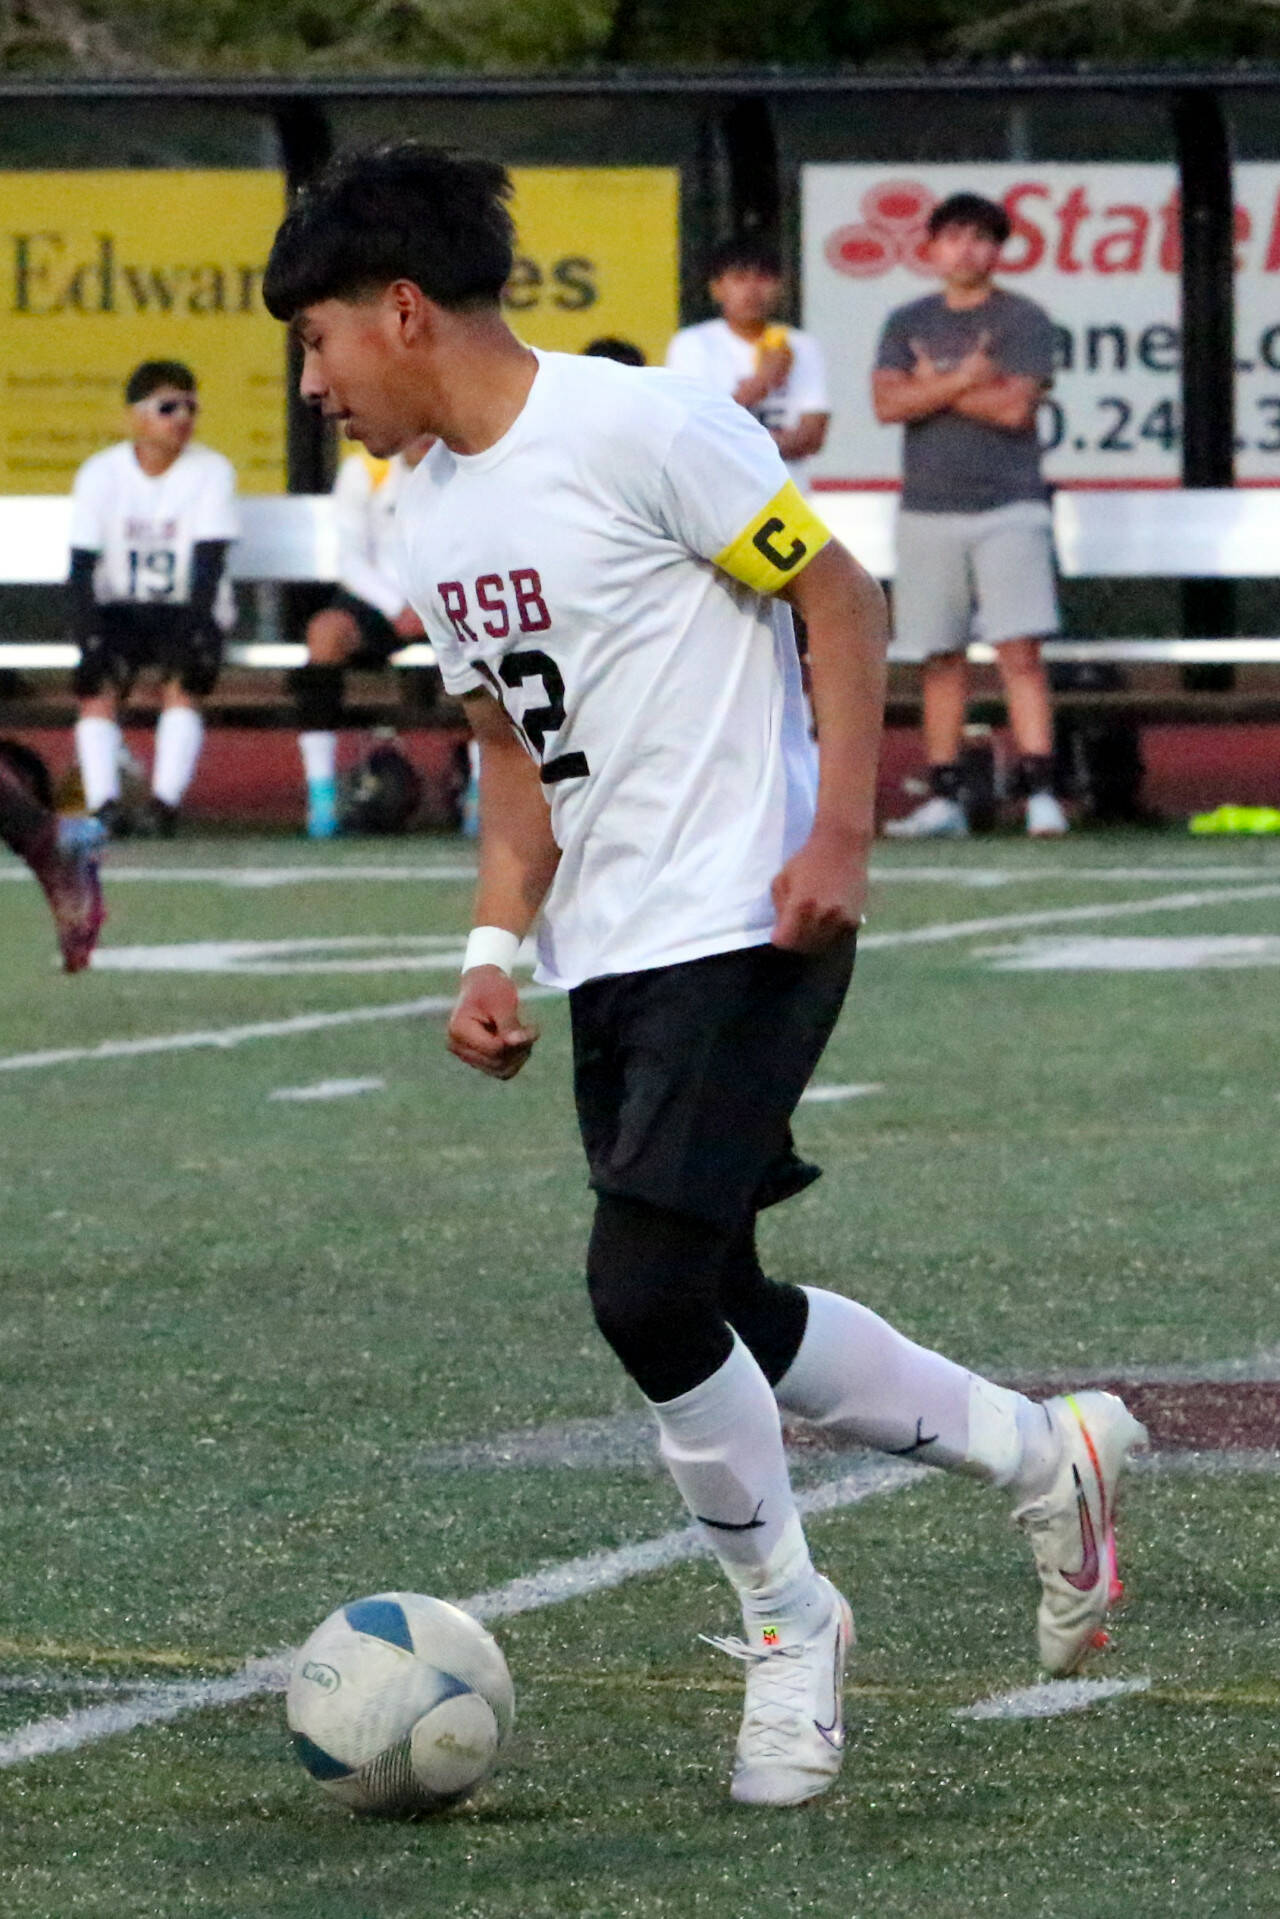 DAILY WORLD FILE PHOTO 
Raymond-South Bend midfielder Edgar Ramirez scored two goals in a 3-2 win over Hoquiam on Wednesday in Hoquiam.